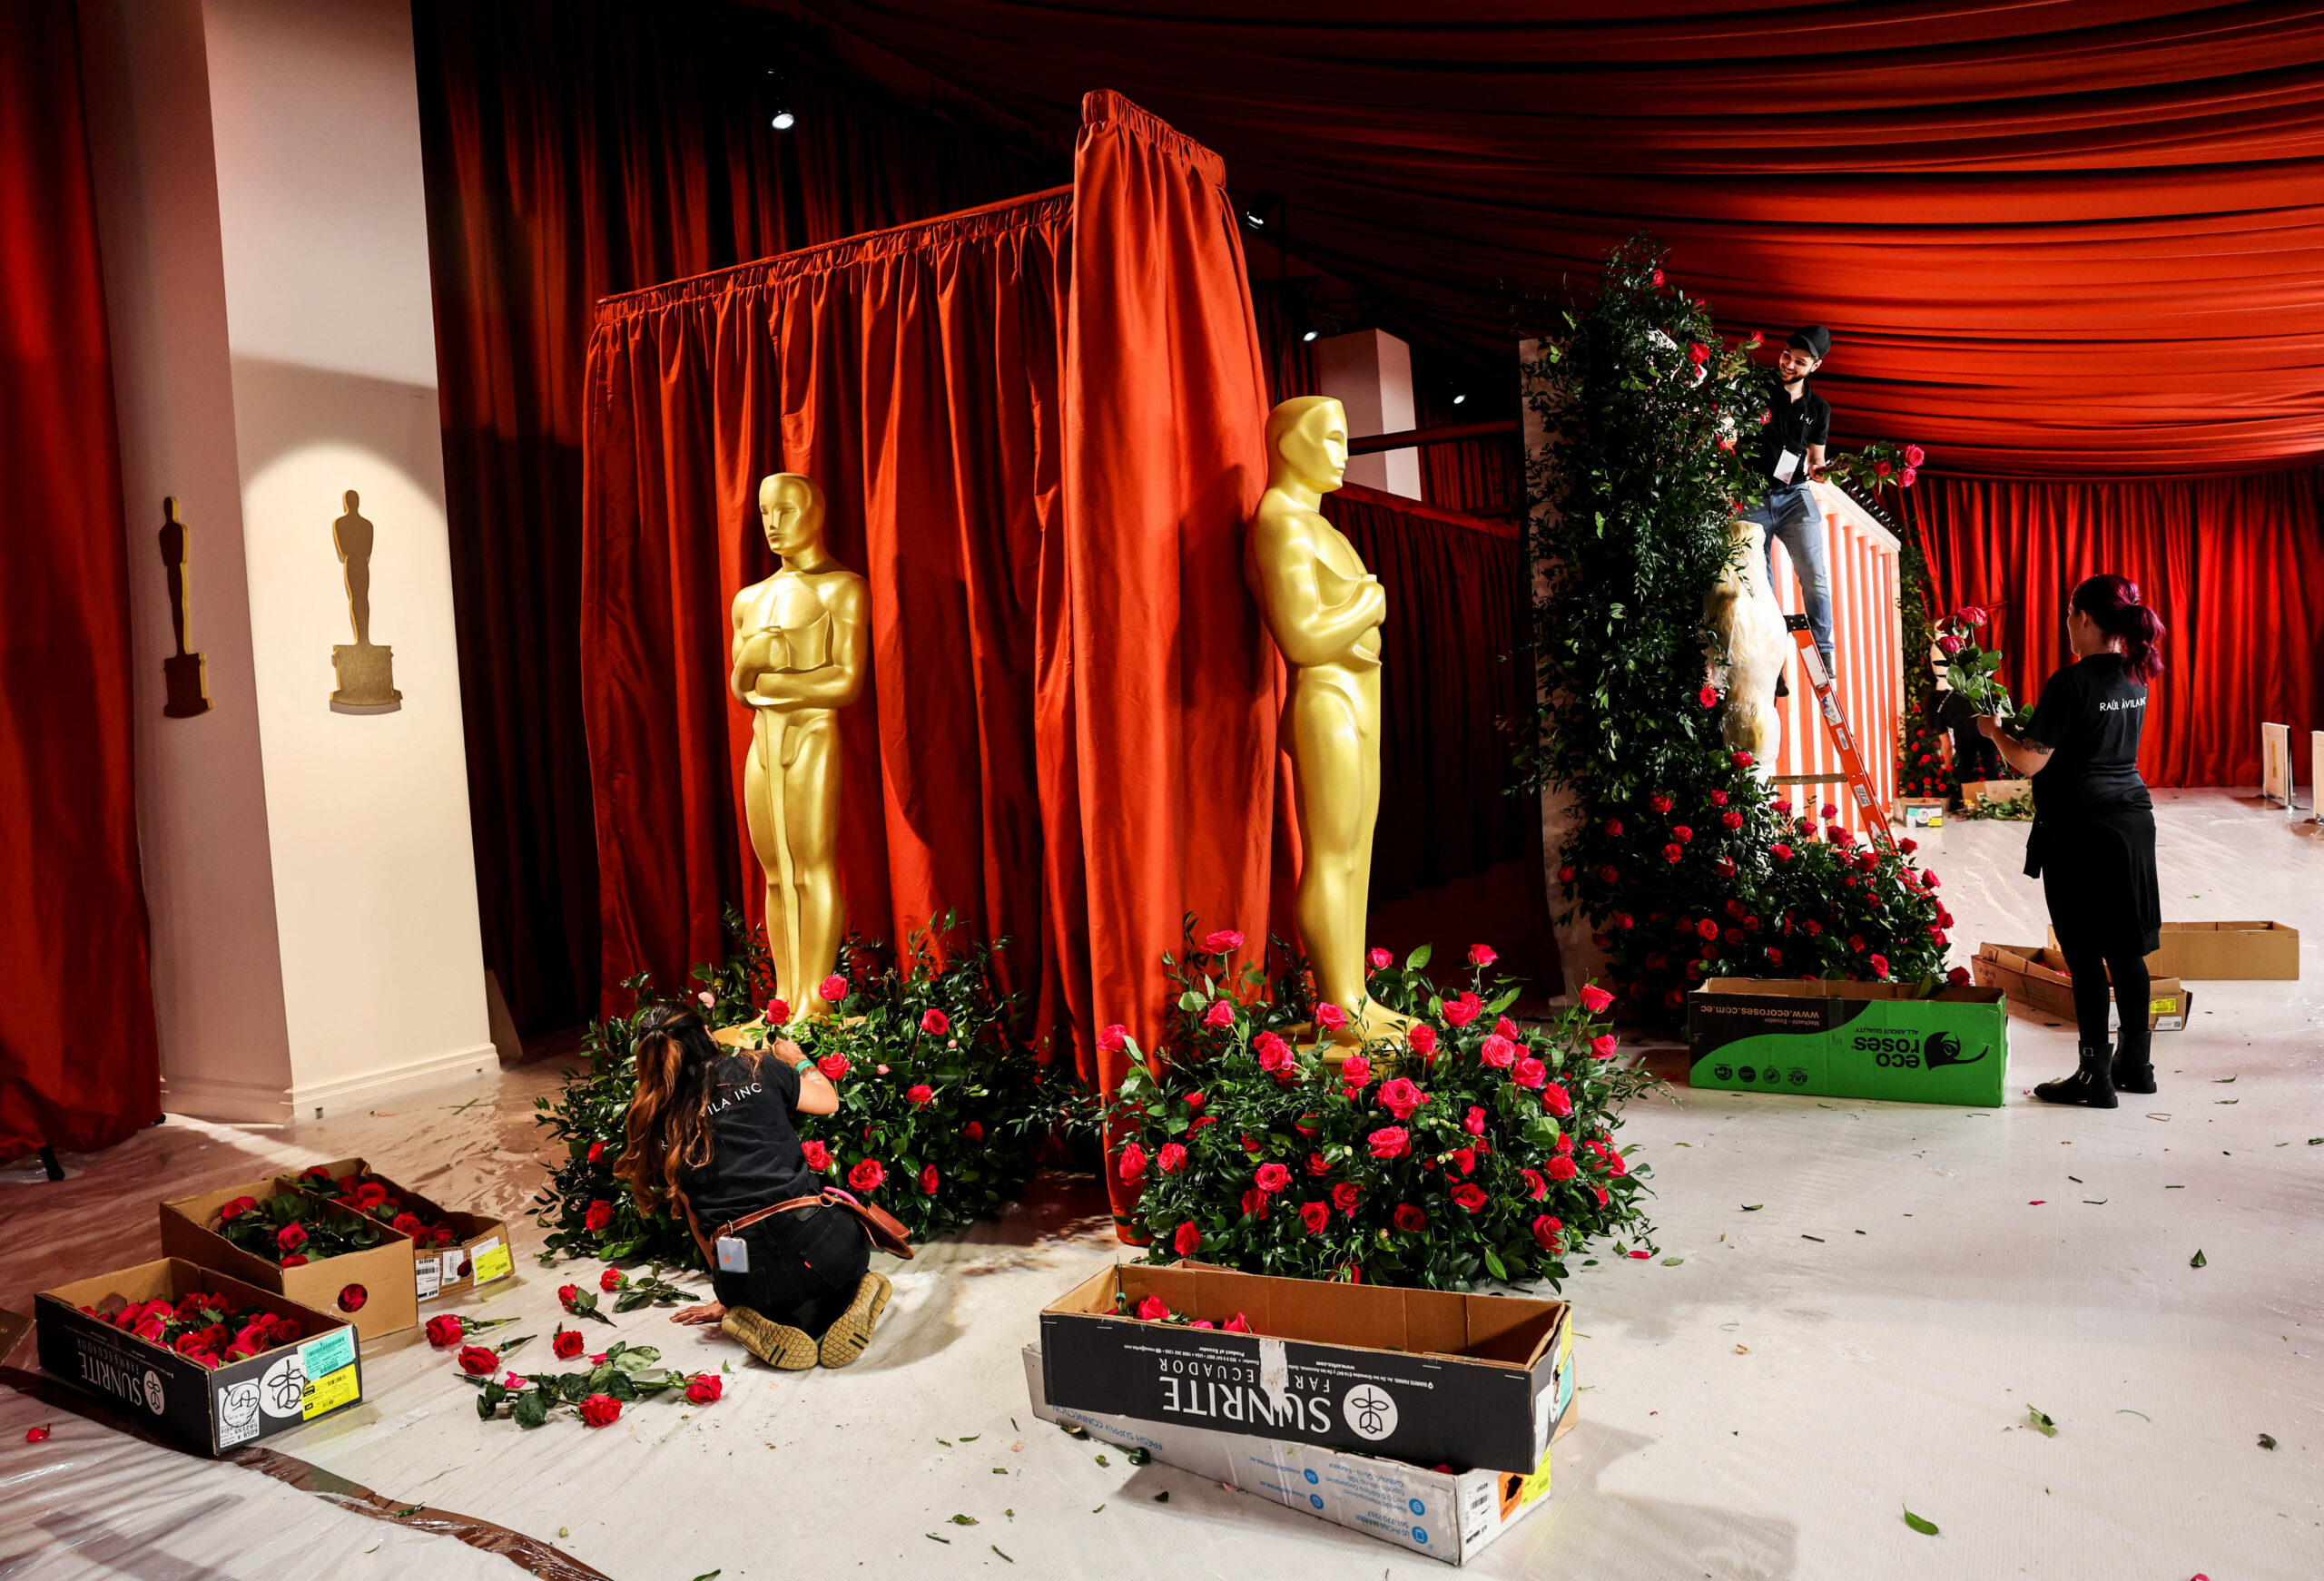 Workers decorate Oscar statues with flowers as preparations continue for the 95th Academy Awards, also known as the Oscars, in Los Angeles, California, U.S., March 11, 2023. REUTERS/Aude Guerrucci